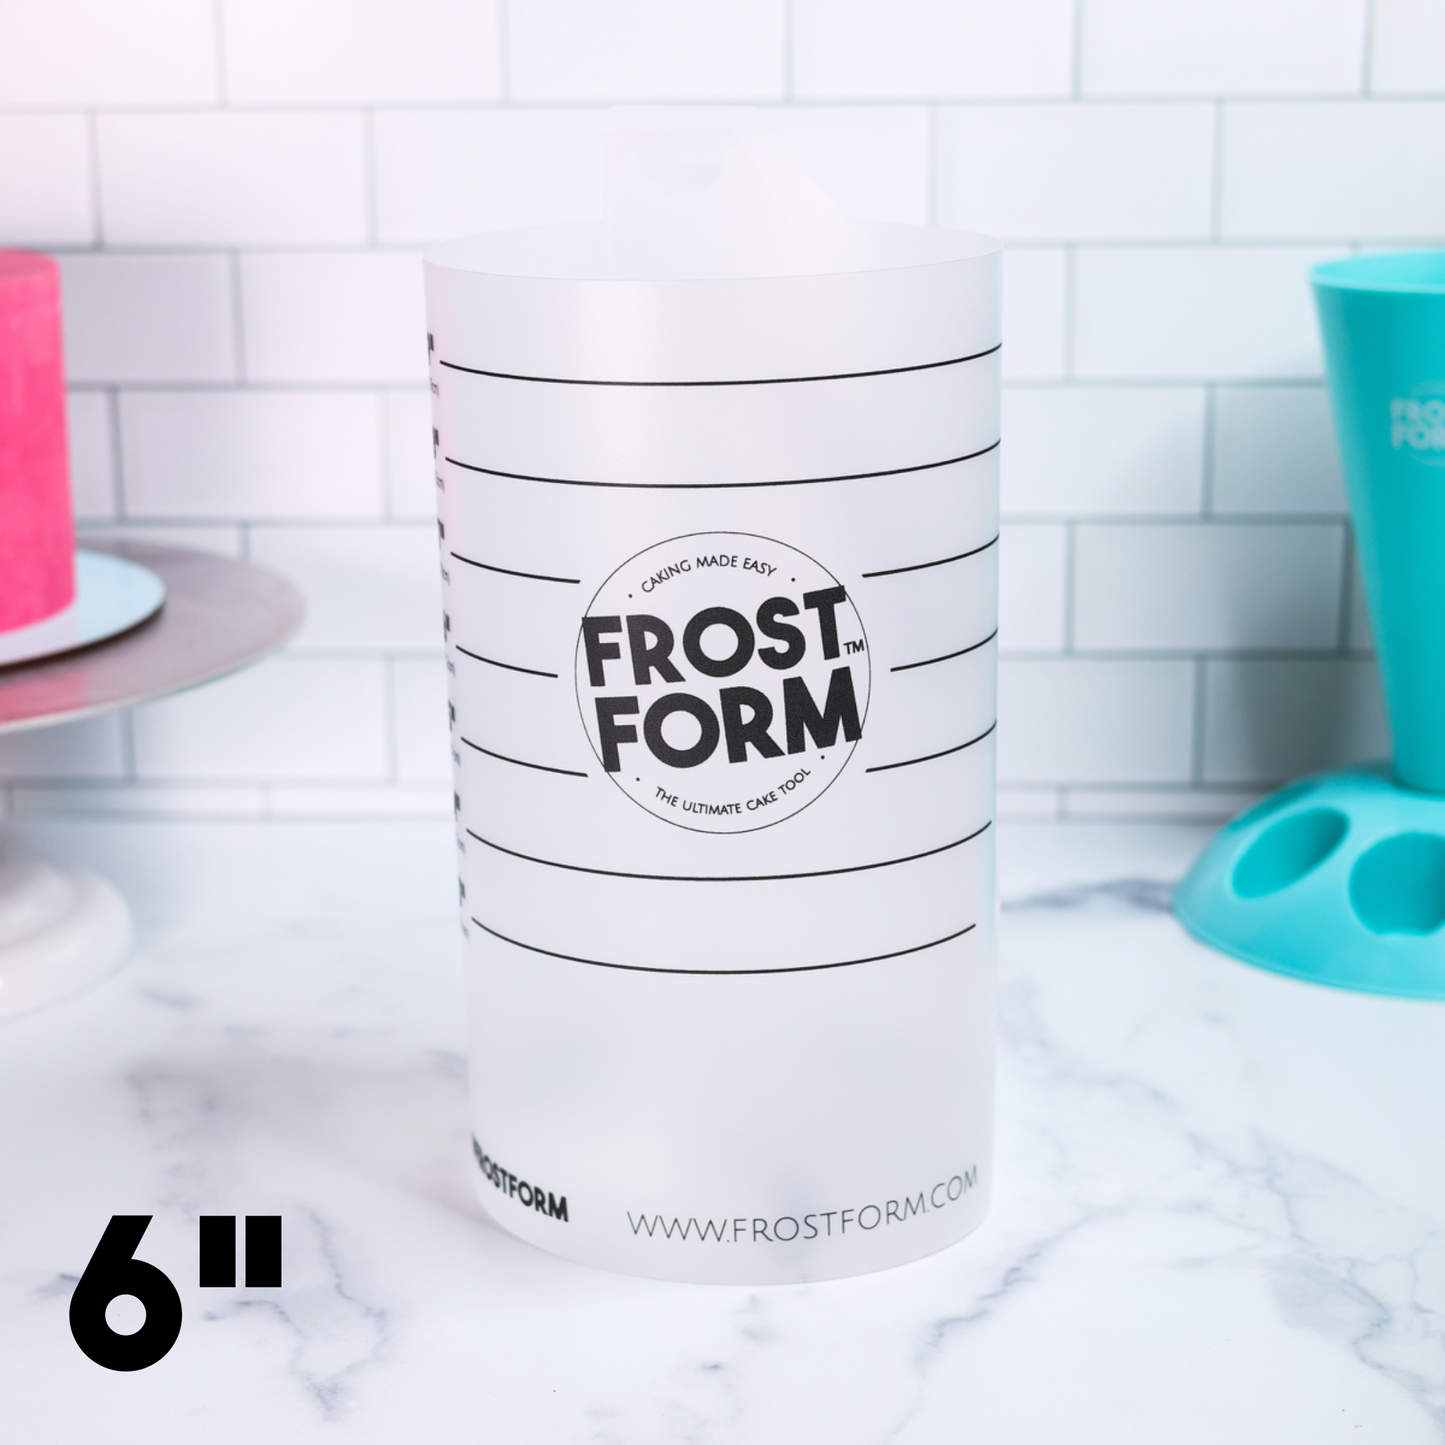 Frost form FULL process! Have you tried this incredible cake tool yet?